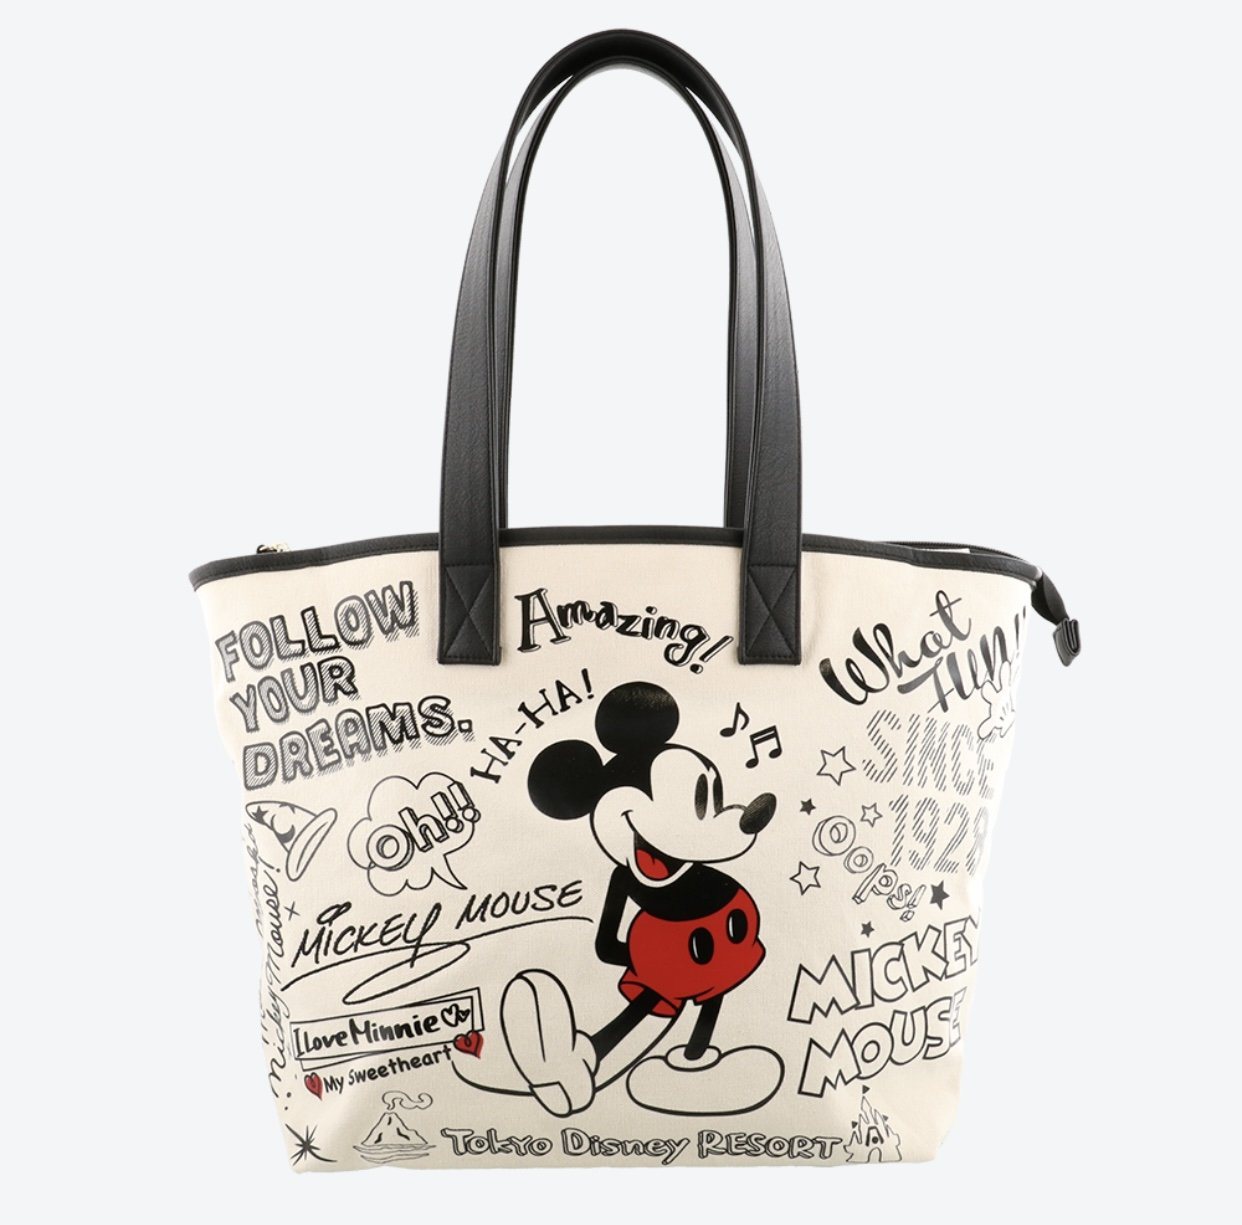 Disney Mickey Mouse Tote Bag From Uniqlo for Sale in Rosemead